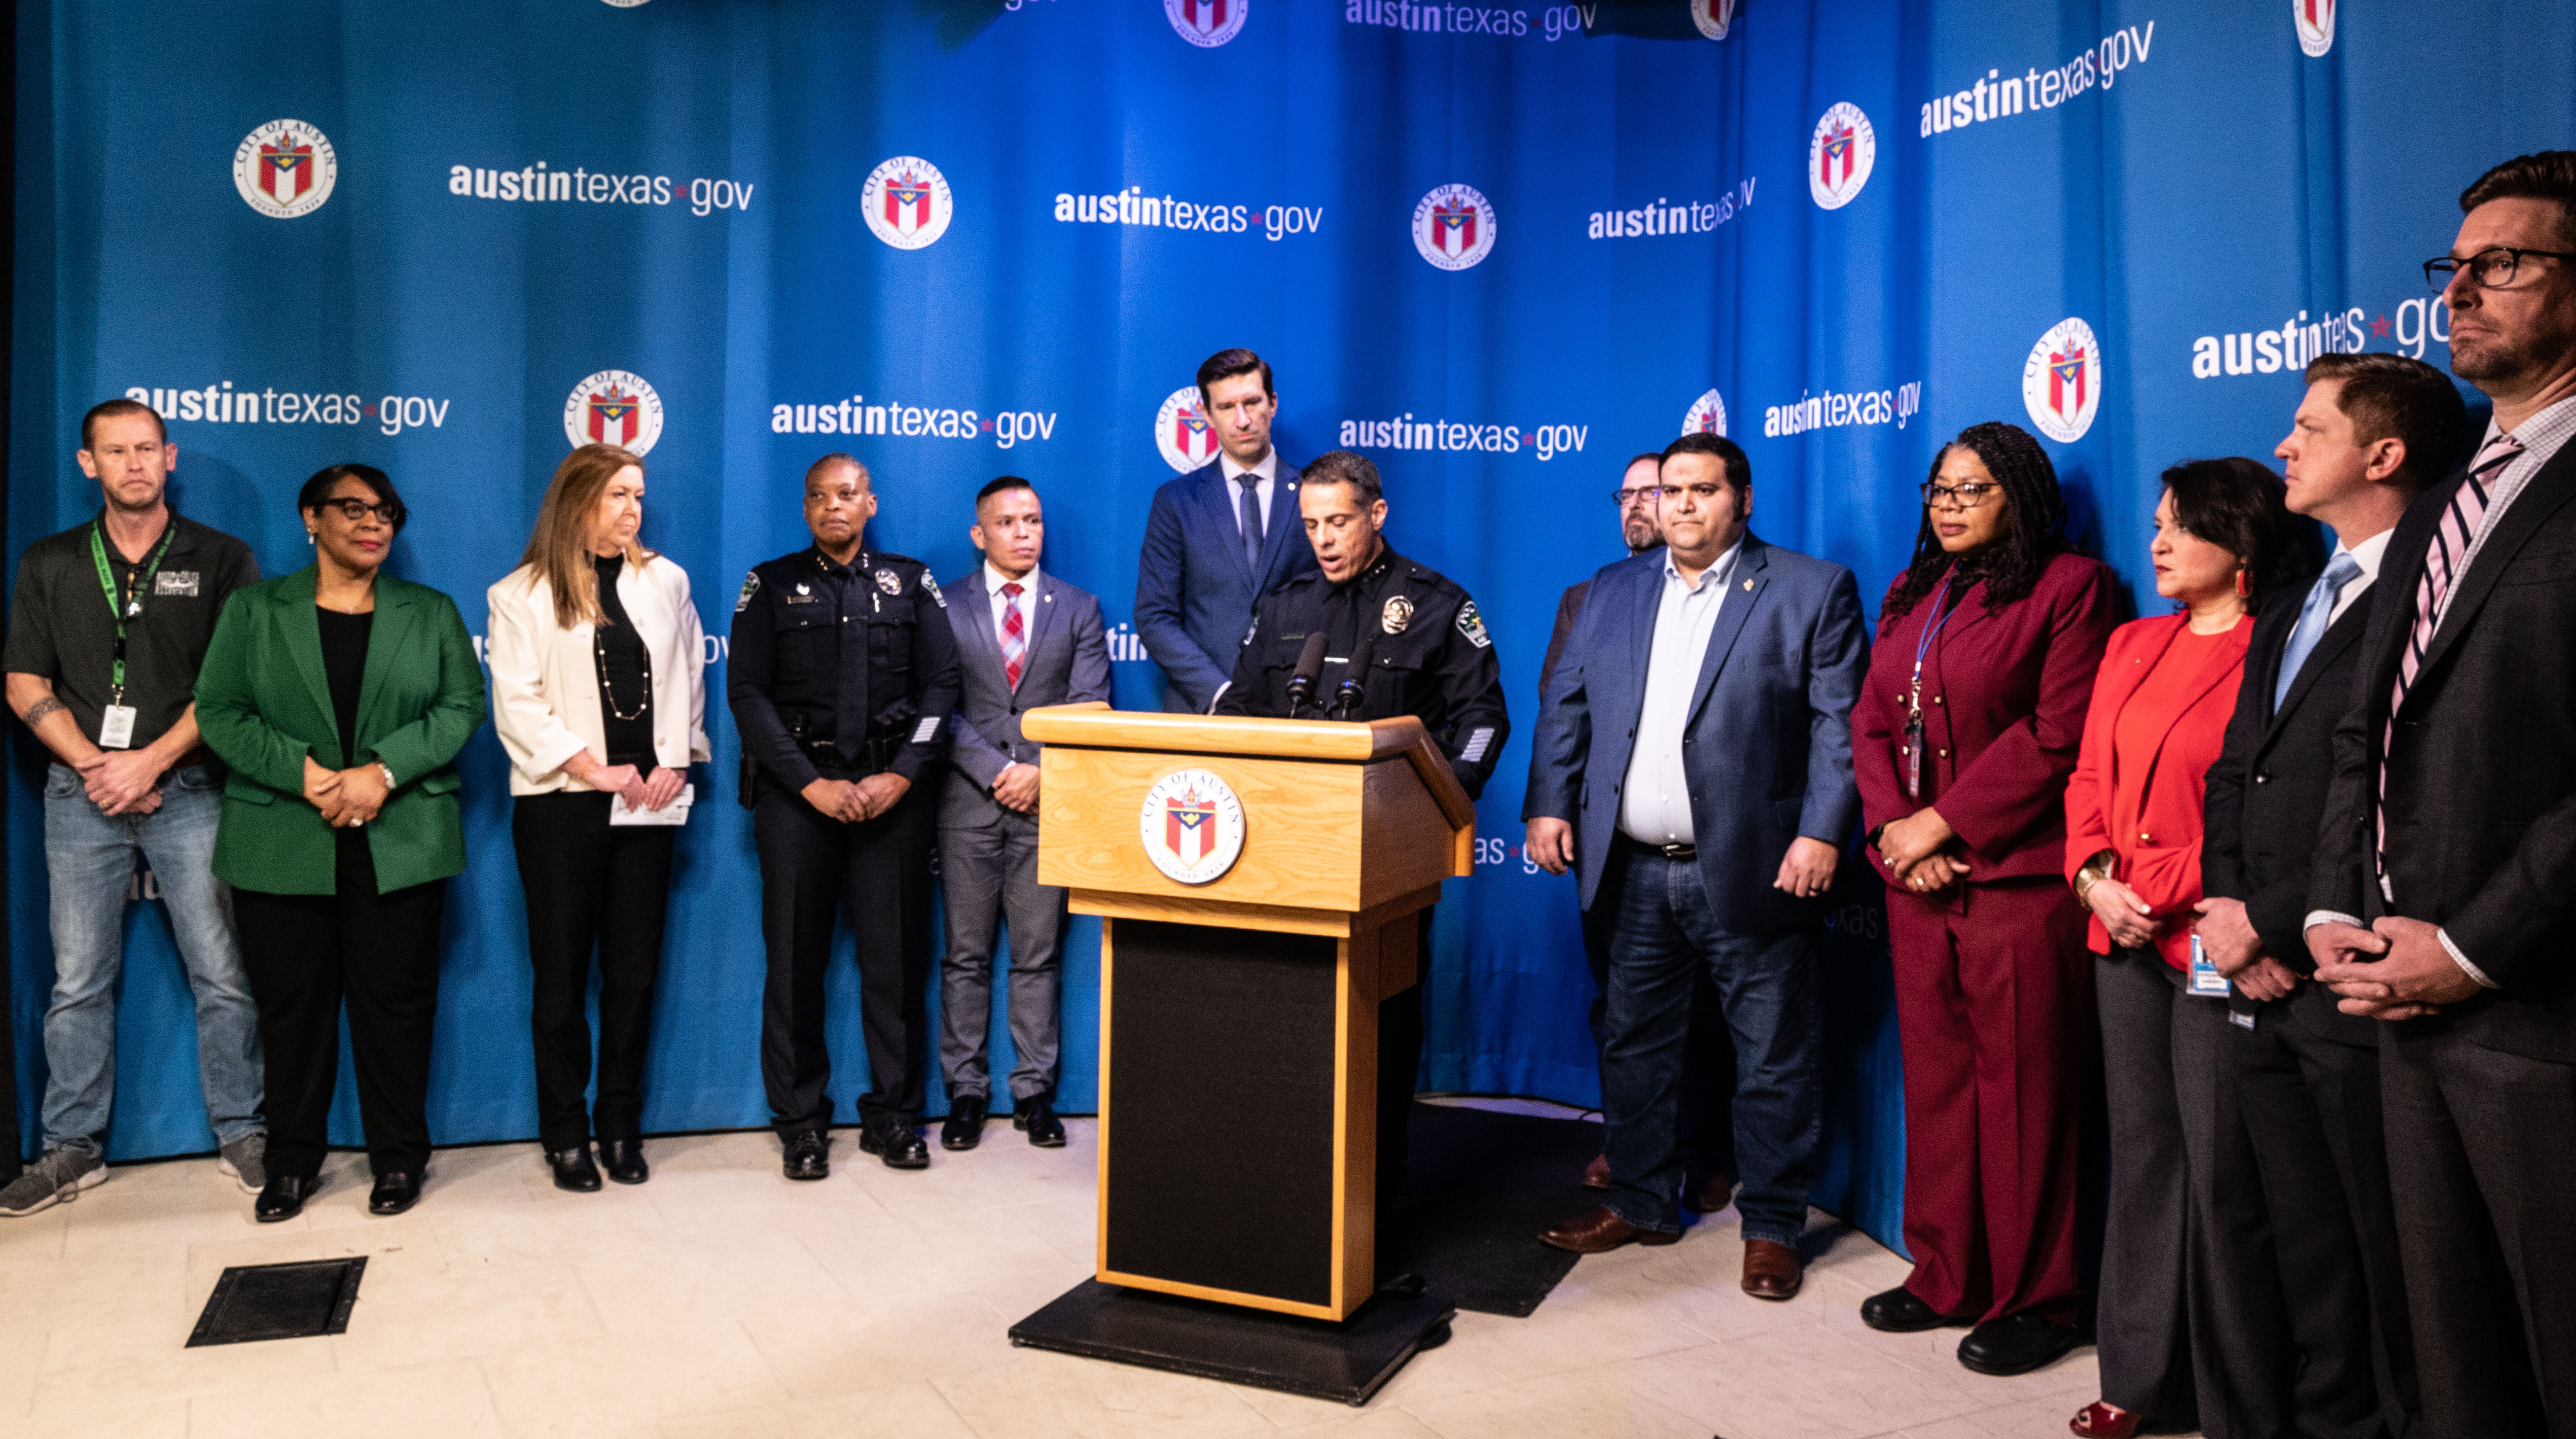 Chief Chacon, City Manager Cronk, and APA President Villarreal address a news conference on Feb. 9.